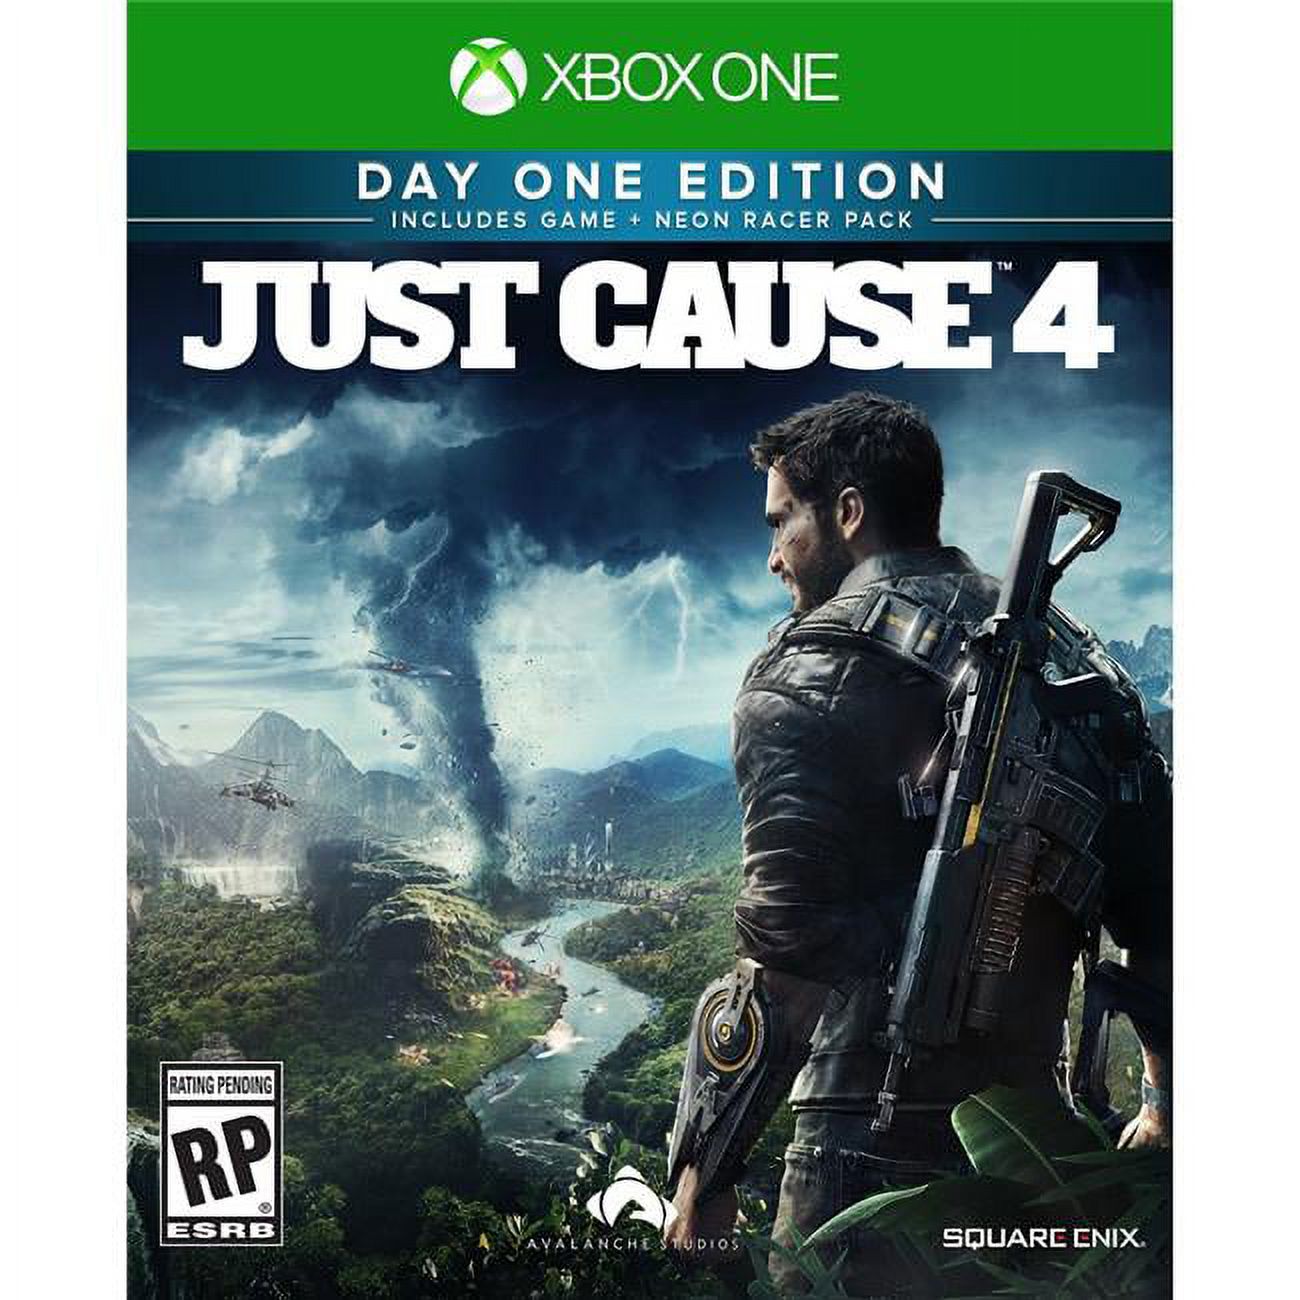 Just Cause 4 Day One Limited Edition, Square Enix Xbox One, 662248921693 - image 1 of 5